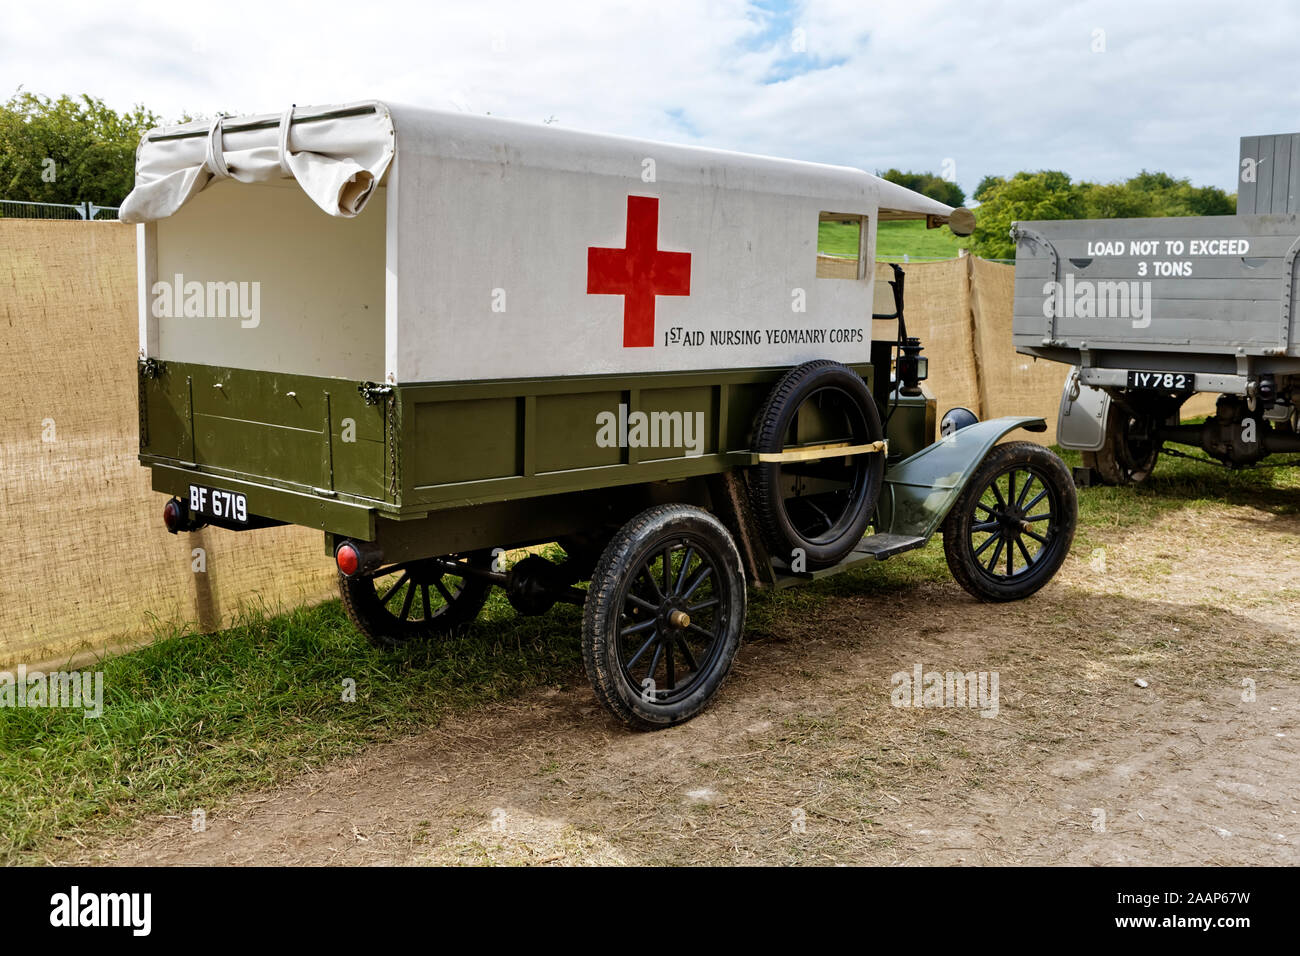 A re-created Ford Model T Ambulance that was used by the British Army 1st Aid Nursing Yeomanry Corps in WW1 at the Great Dorset Steam Fair 2015 Stock Photo